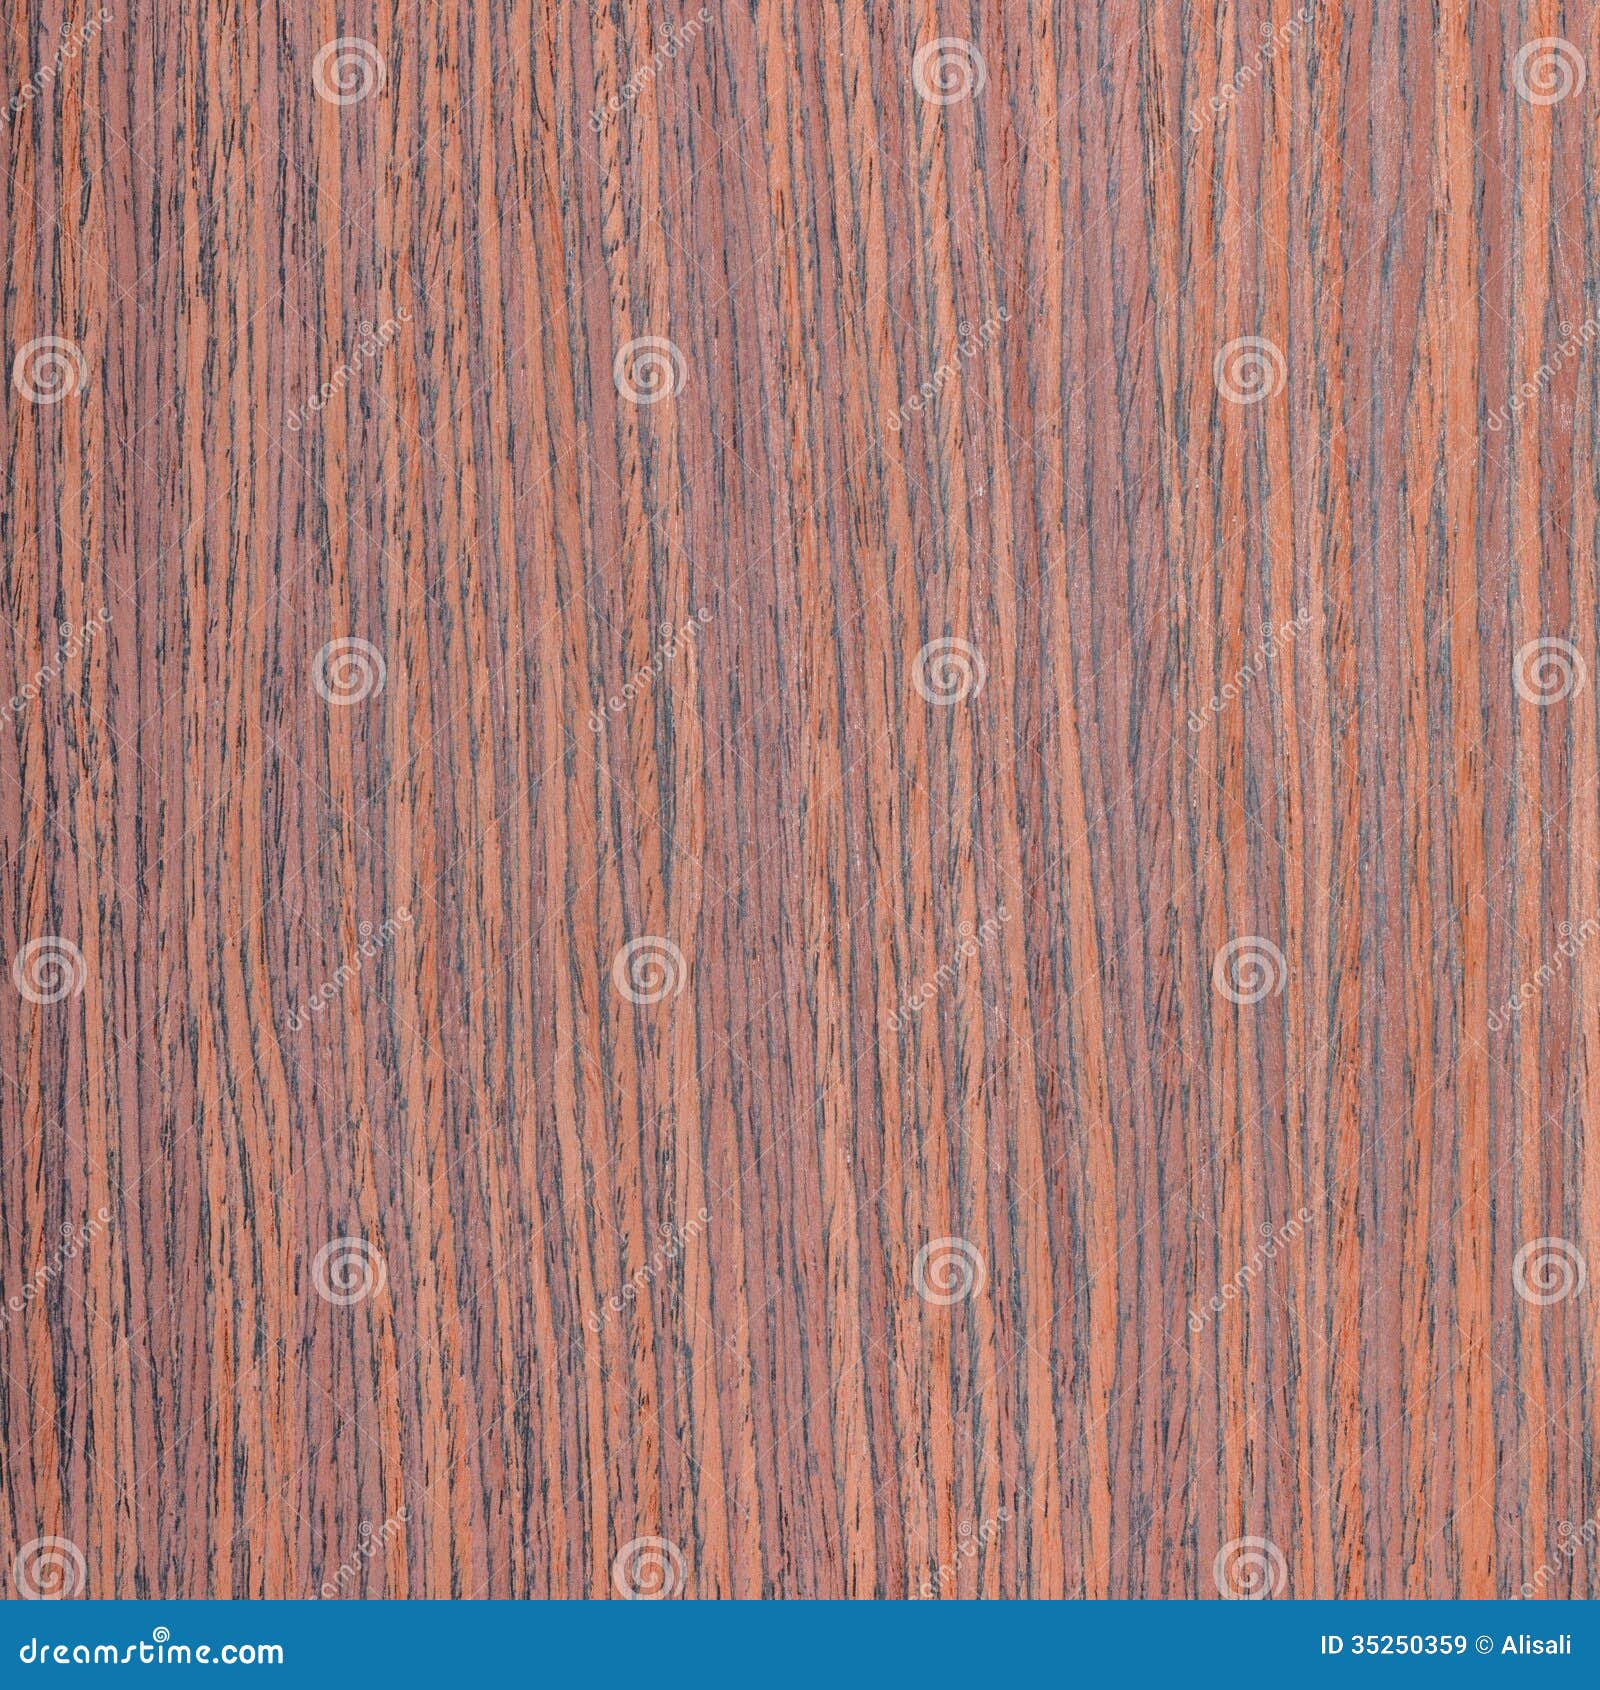 rosewood wood texture